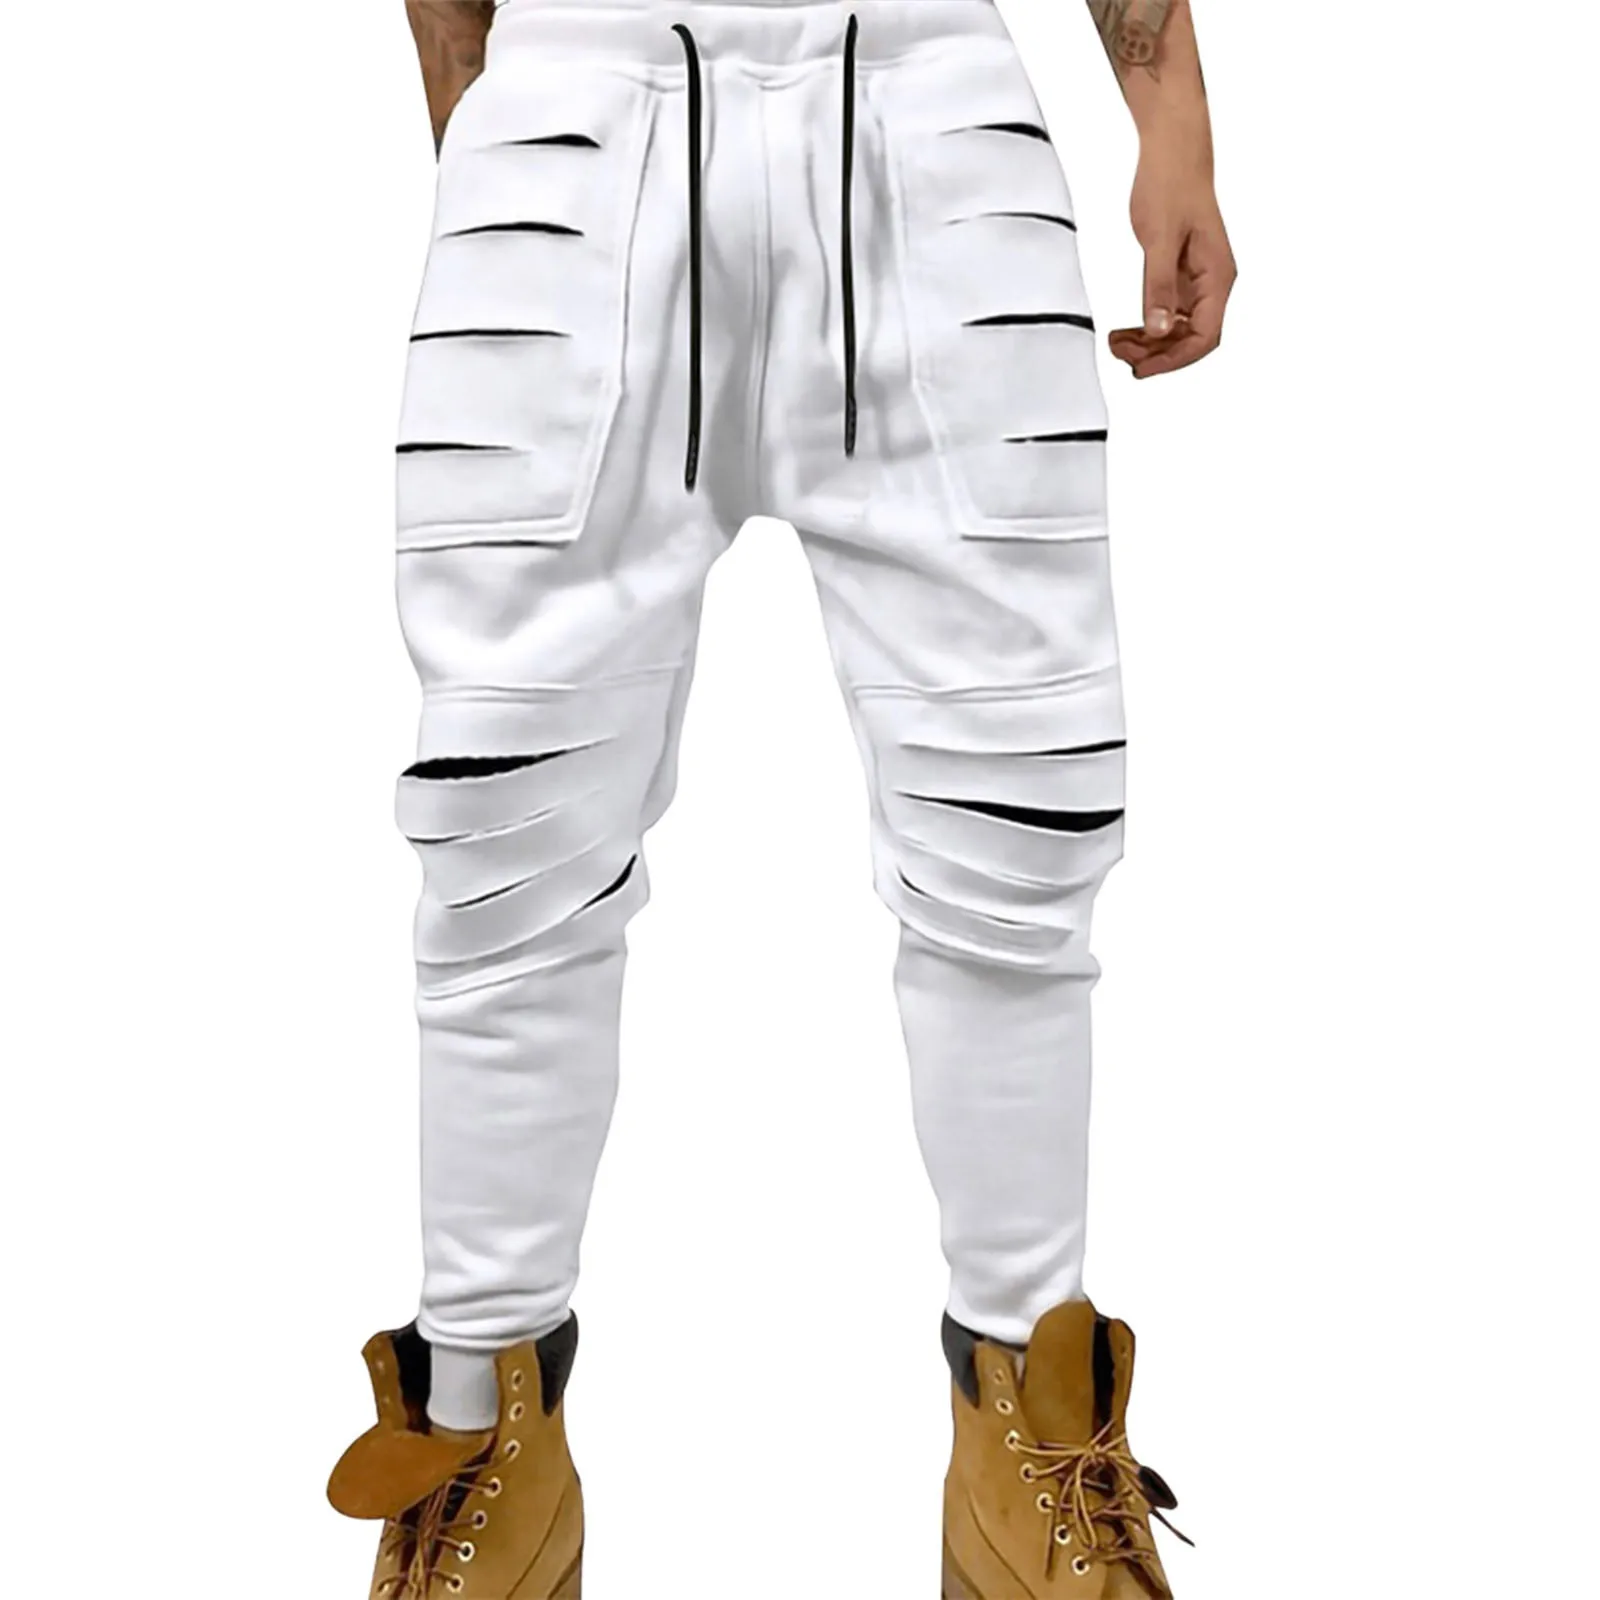 Men's Sports Tracksuit Pants Sweatpants Loose Ripped Trousers Casual Jogging Street Pants With Pockets Streetwear gym joggers for men Sweatpants